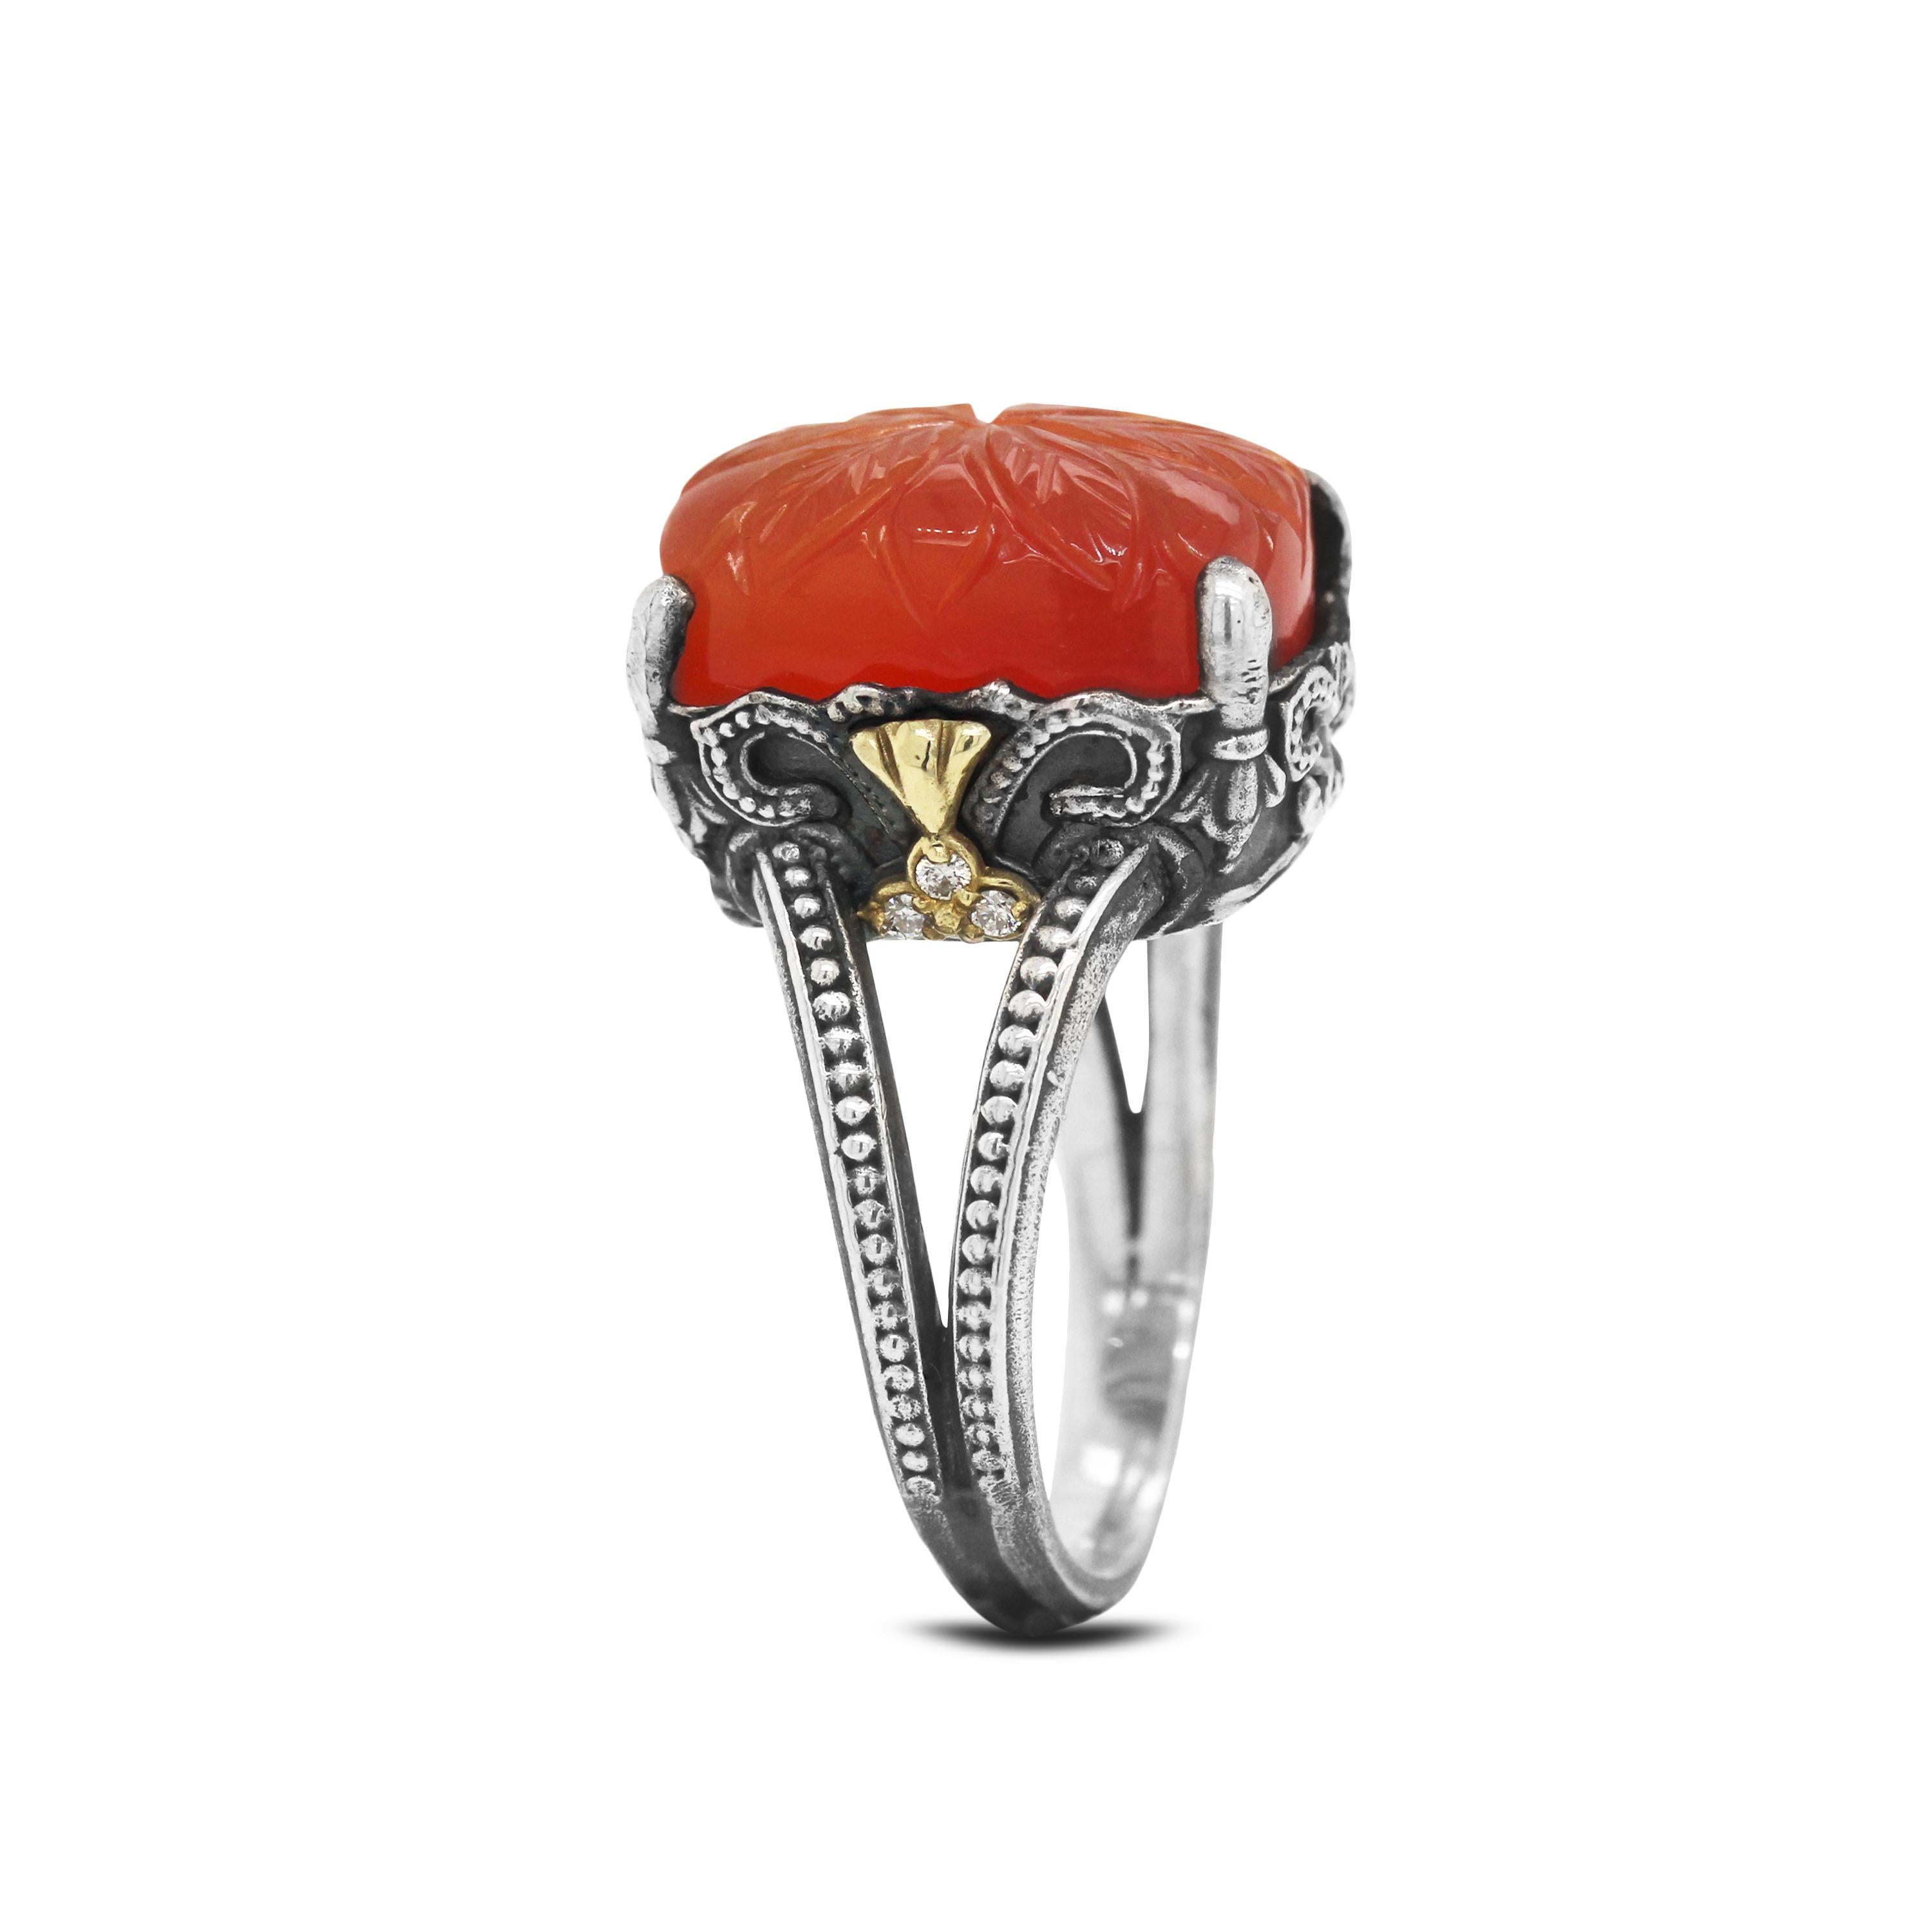 Aged Silver and 18K Gold Ring with Diamonds and Floral Carved Carnelian center by Stambolian

This unique ring is from the 